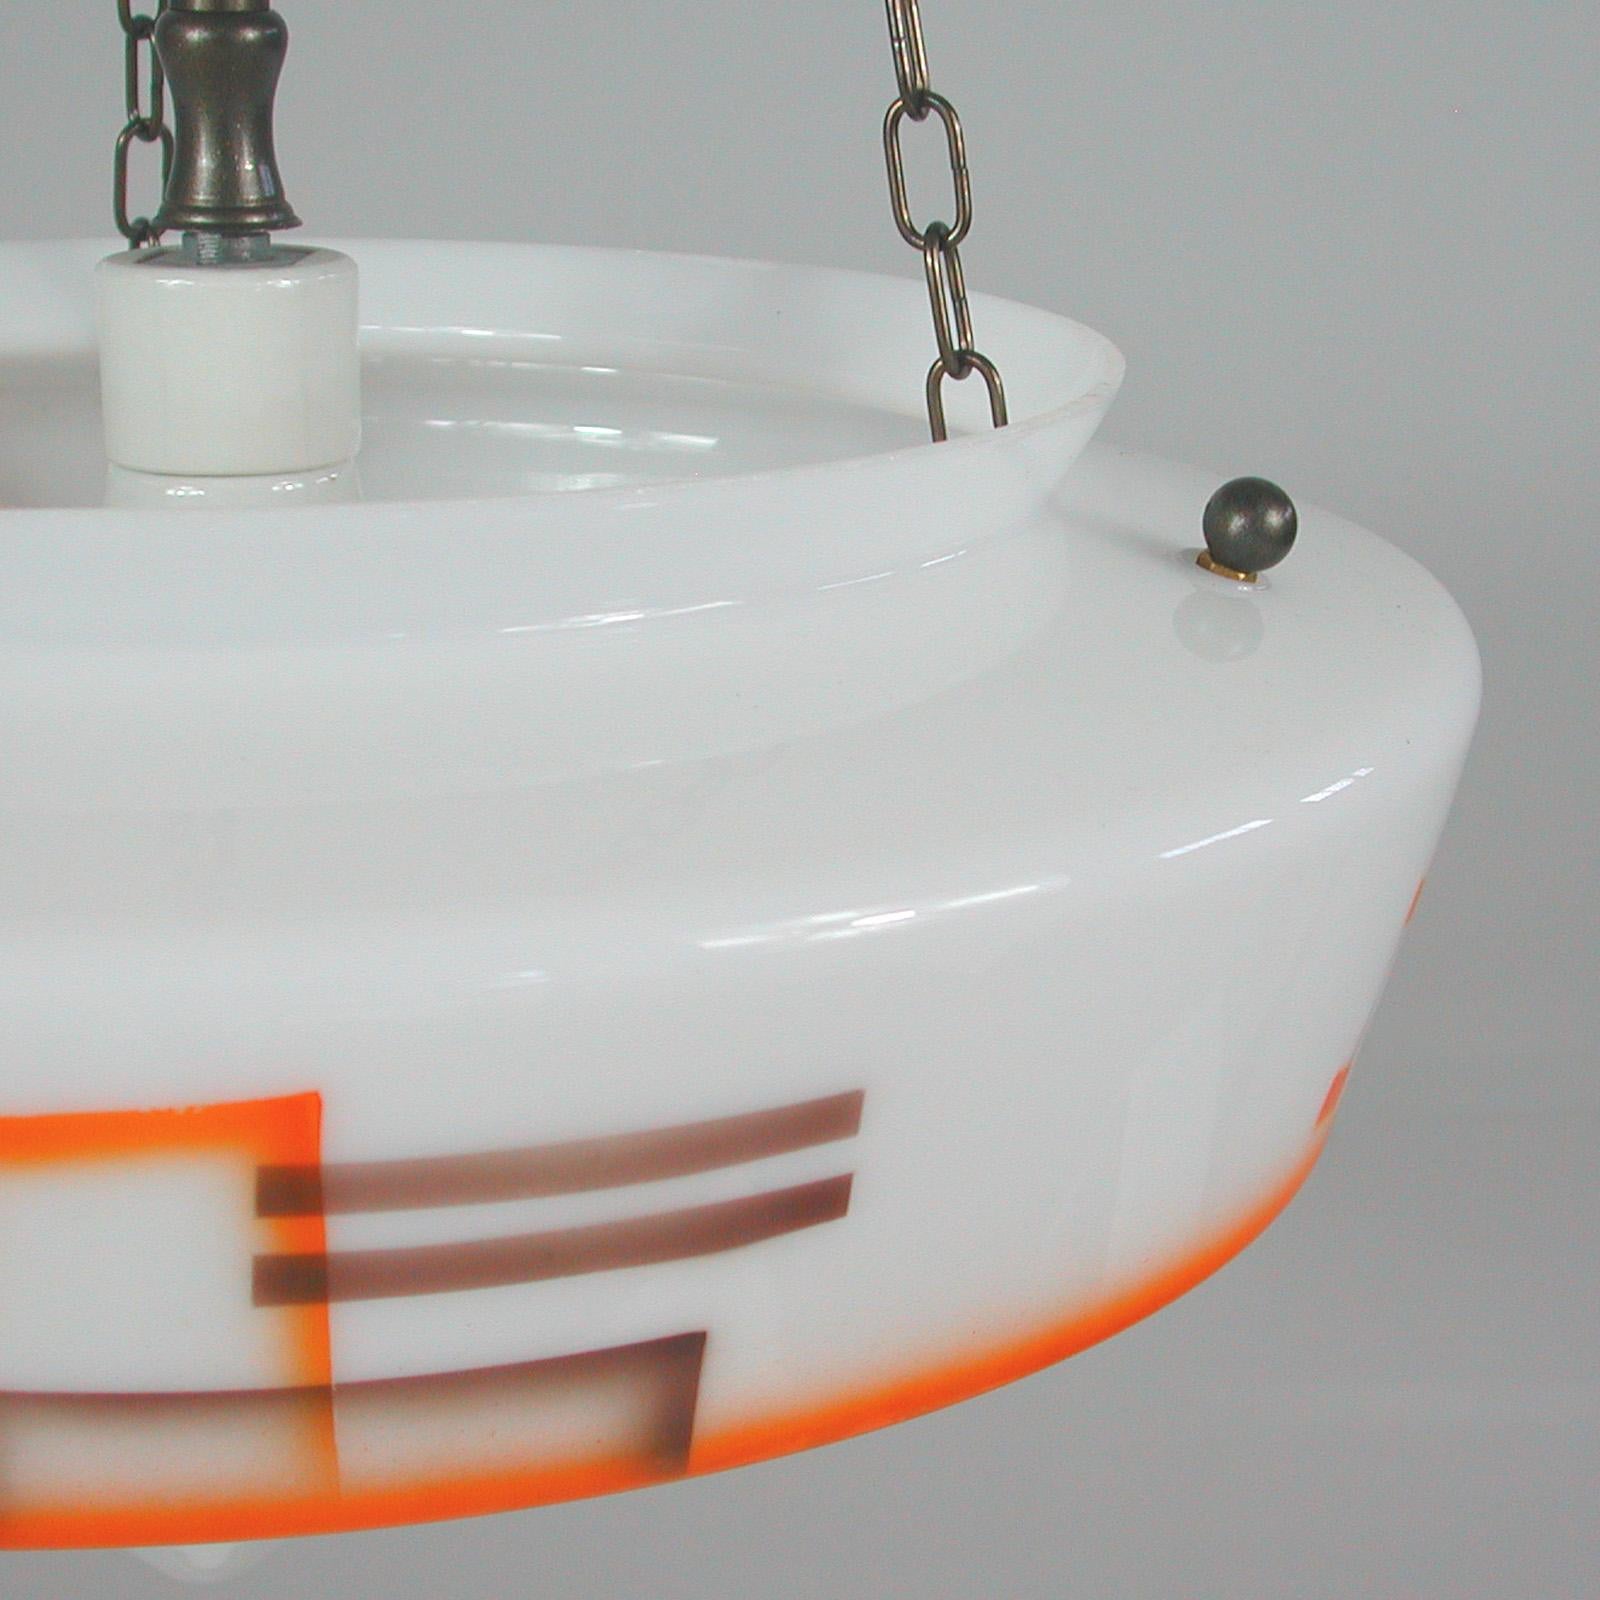 German Art Deco Suspension Light, Enameled Glass and Brass, 1930s For Sale 7